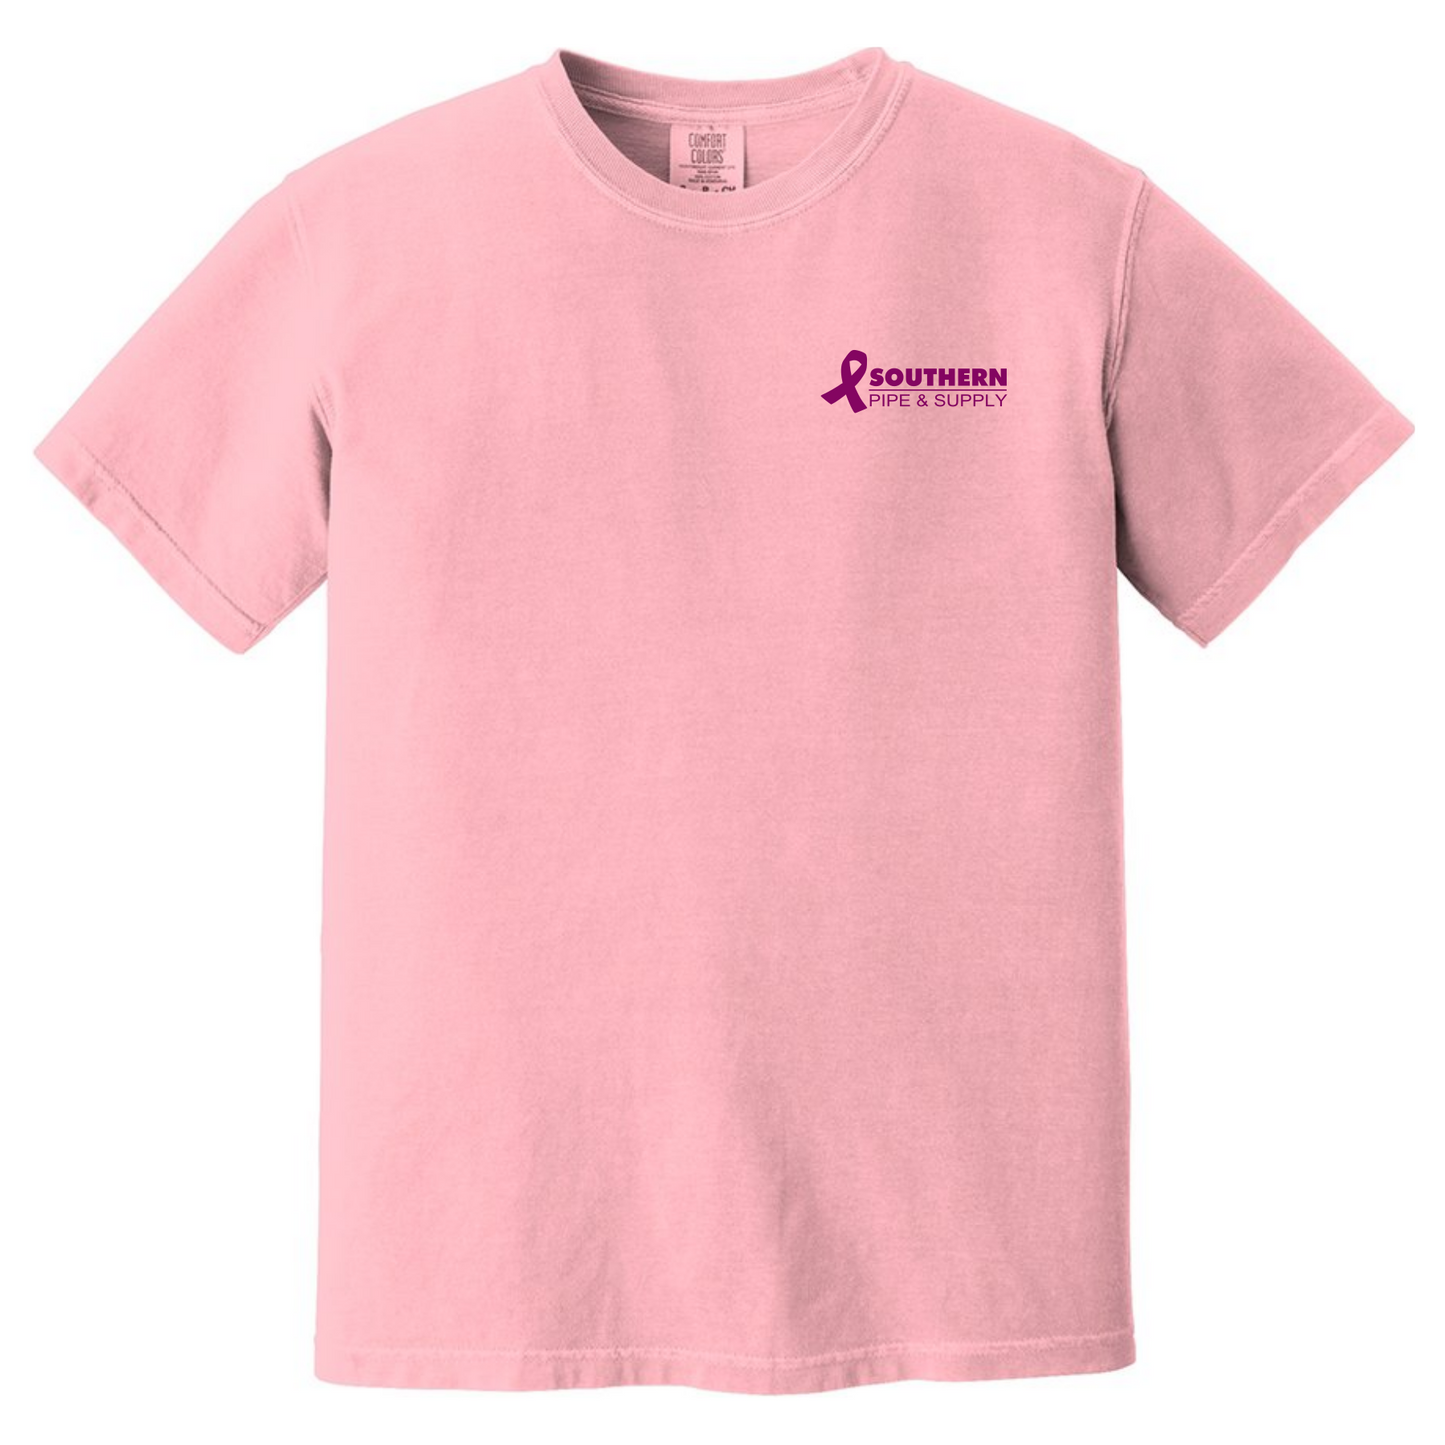 "Hope for the Cure" Breast Cancer Awareness Tee